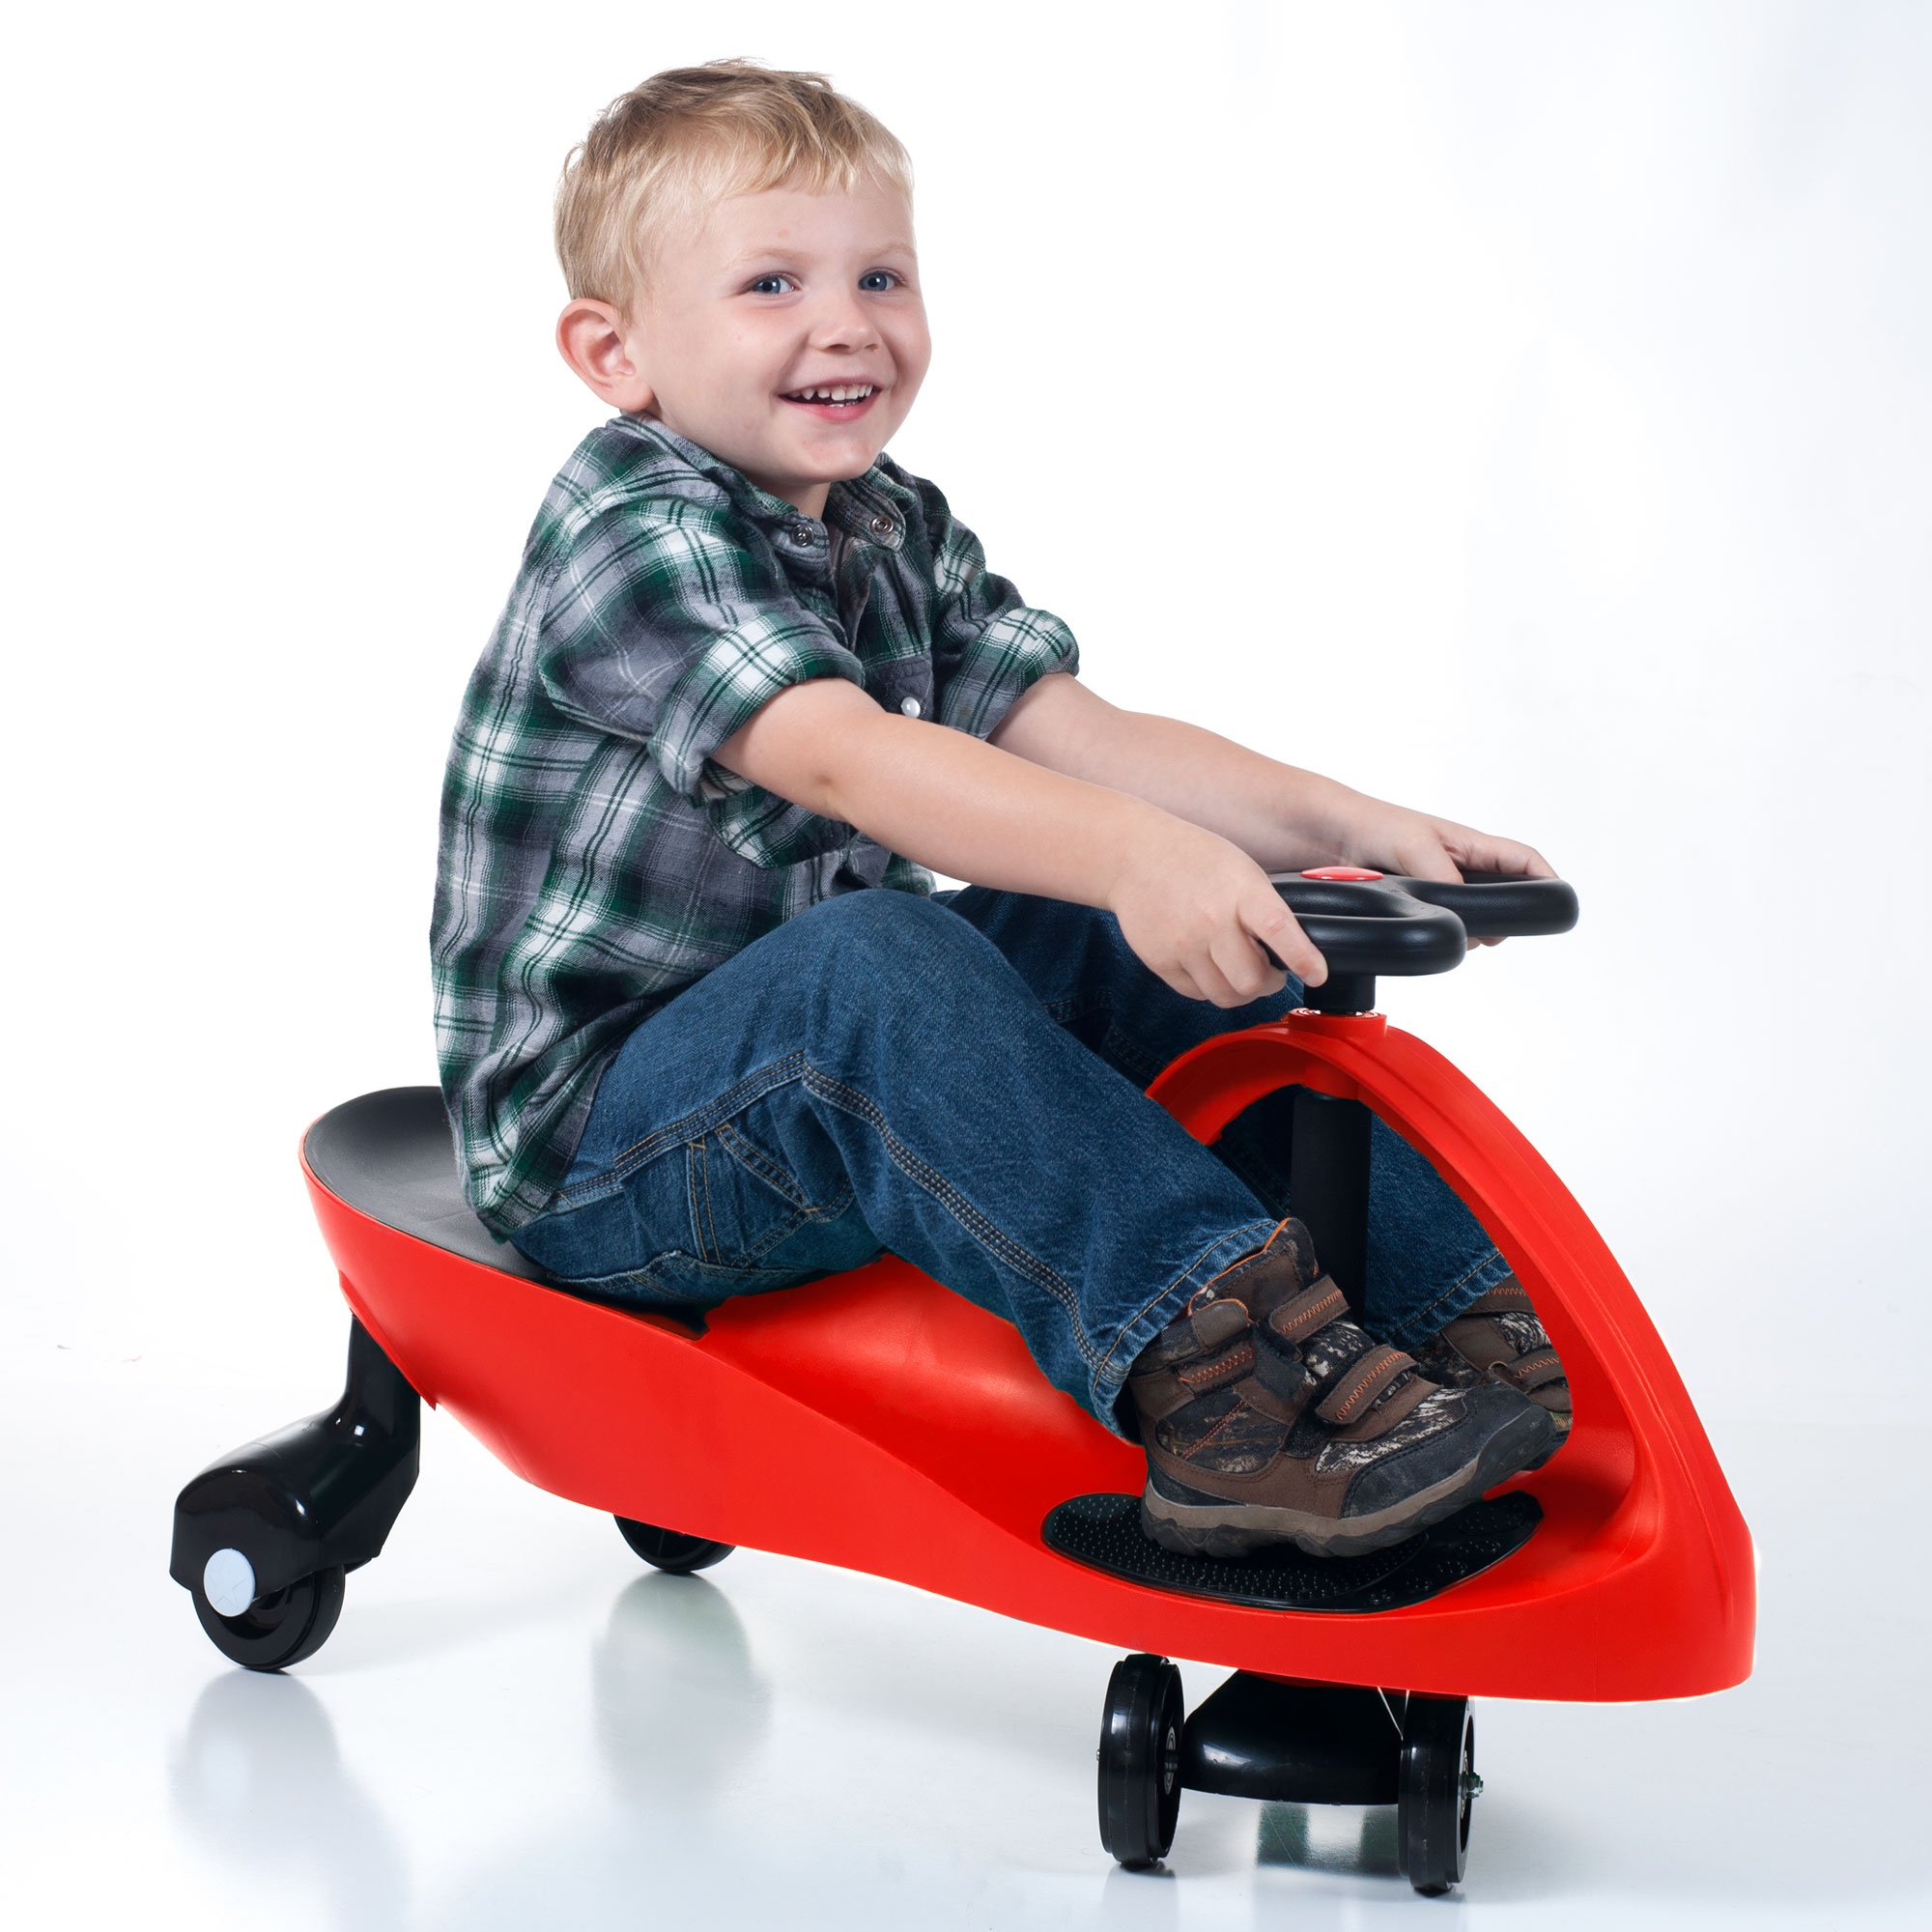 Wiggle Car- Ride On Toy- No Batteries Gears or Pedals- Twist Swivel & Go- Outdoor Play for Boys and Girls 3 Years Old & Up by Lil? Rider (Red) - image 2 of 2